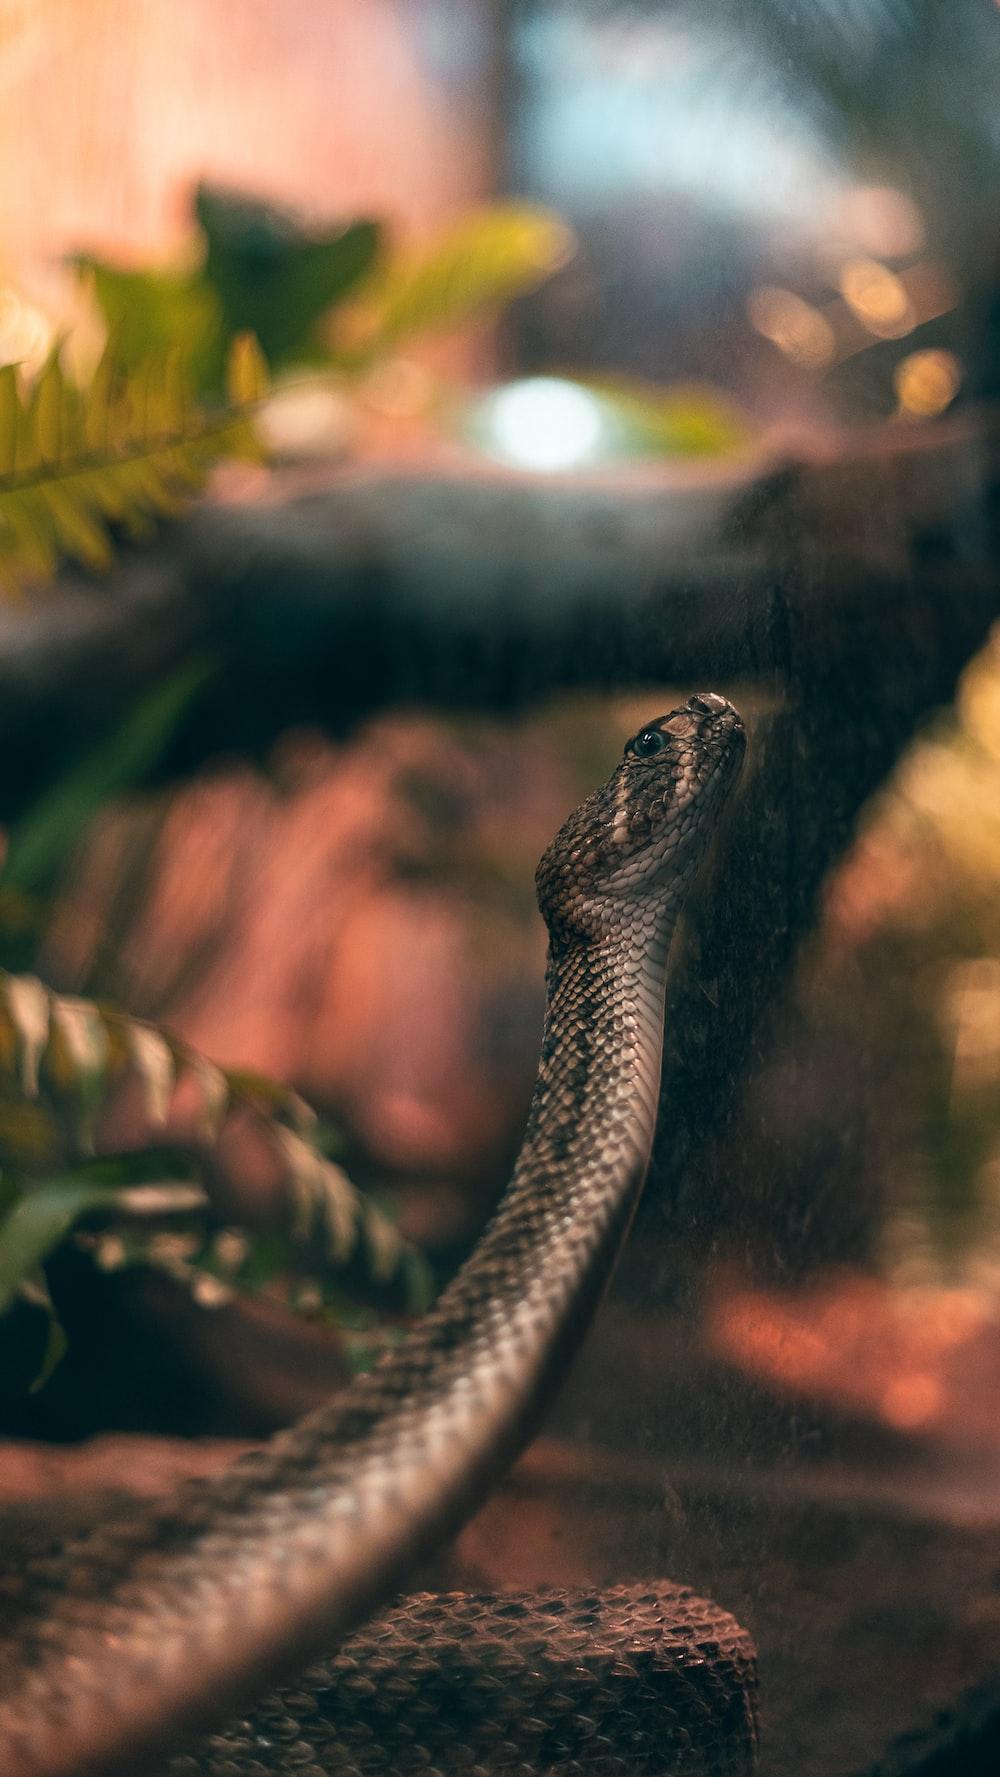 A Snake In Terrarium With Blurred Background Photo